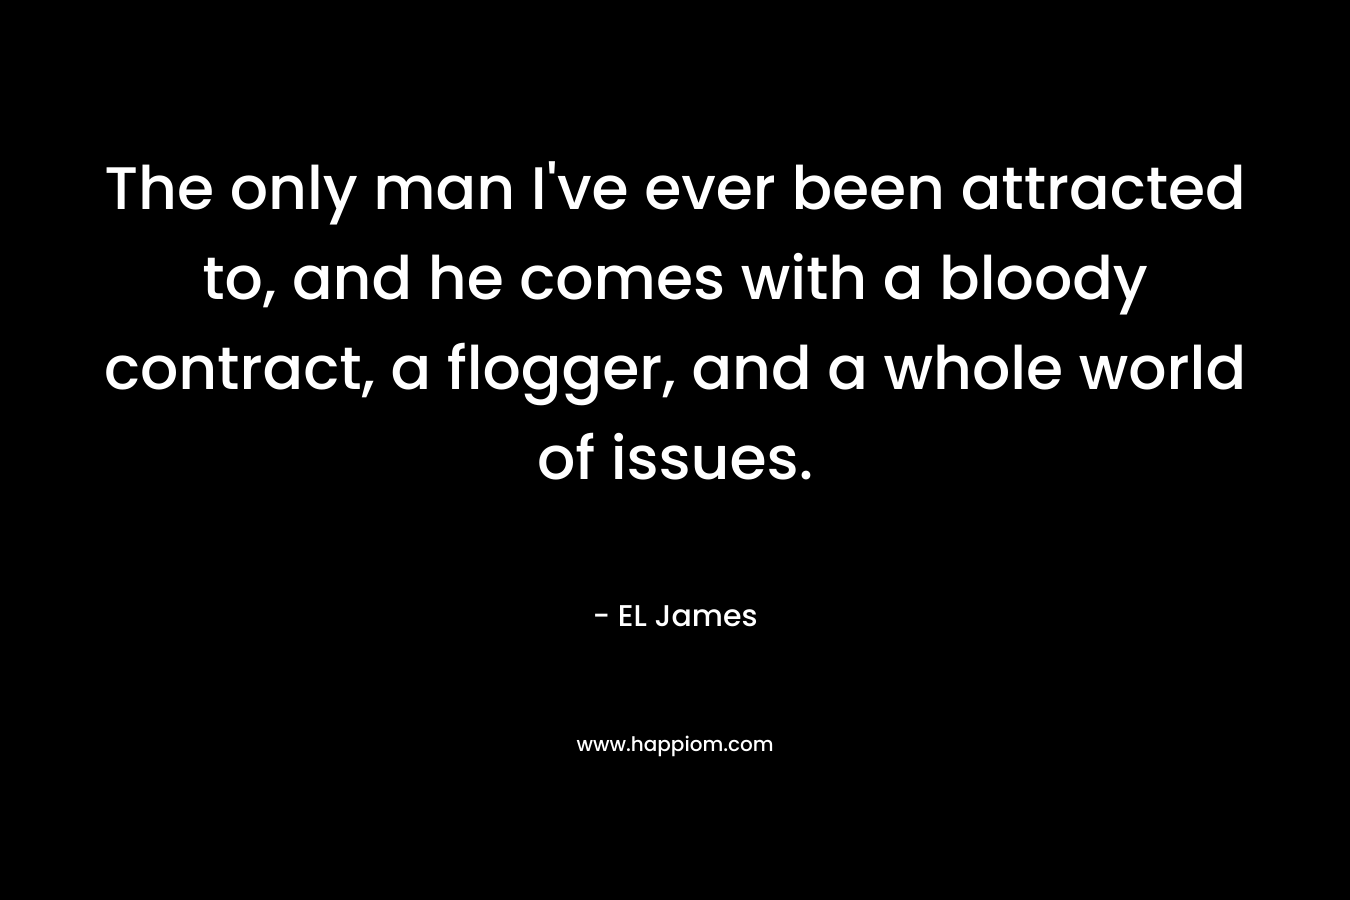 The only man I’ve ever been attracted to, and he comes with a bloody contract, a flogger, and a whole world of issues. – EL James